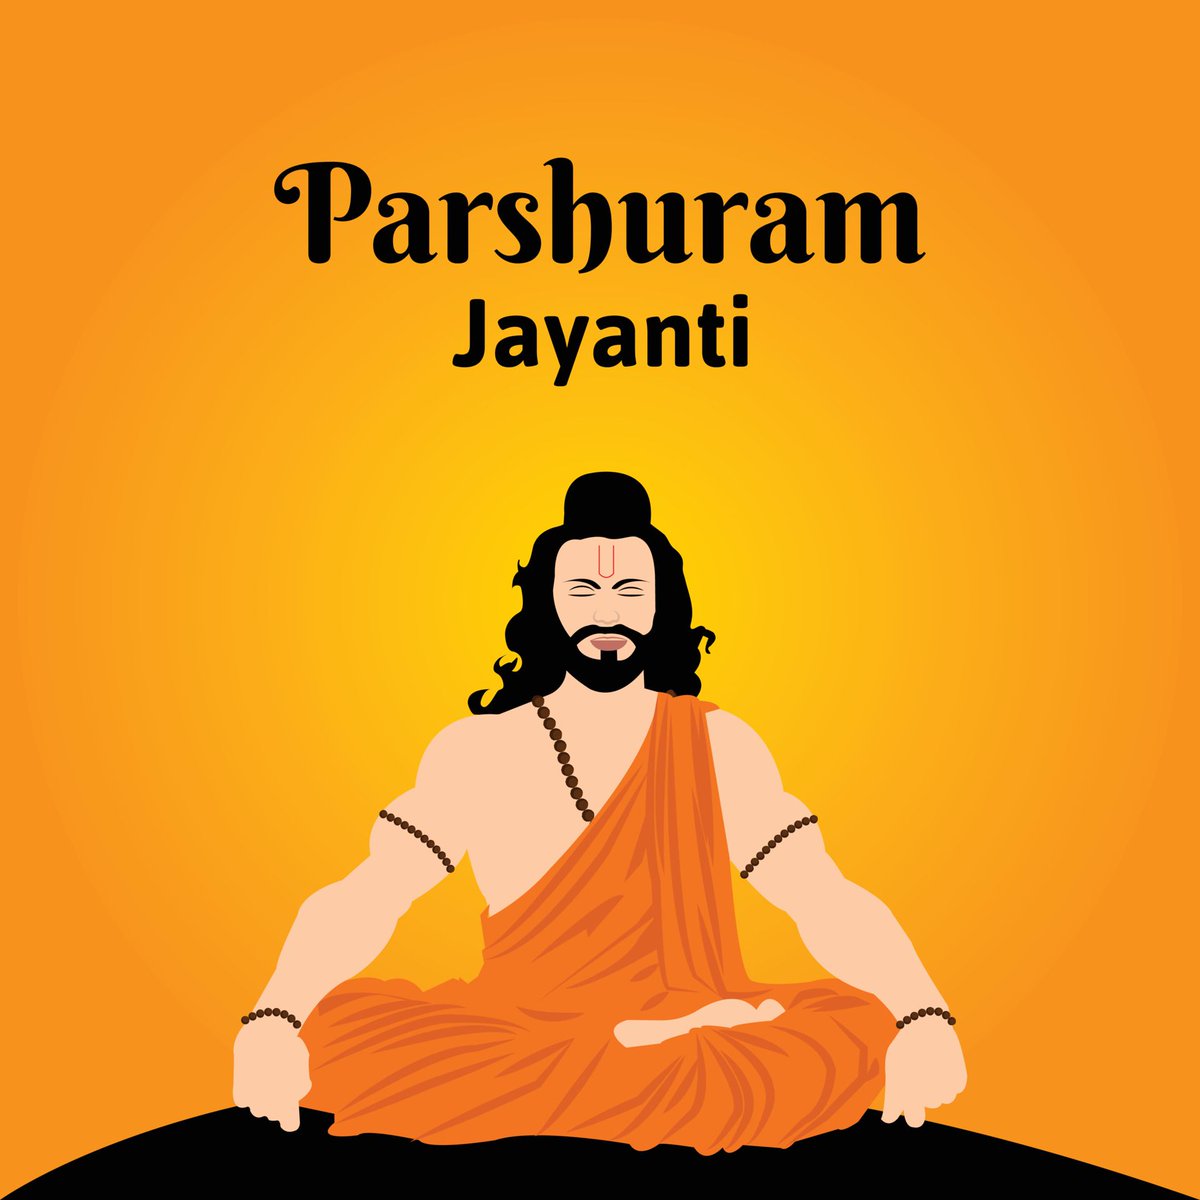 Embracing the auspicious occasion of Parashurama Jayanti,🪓🔱🏹 honoring the indomitable spirit and divine legacy of Lord Parashurama. May his courage and righteousness inspire us towards noble deeds and inner strength. 🙏🌟

#ParashuramaJayanti #DivineLegacy #Courage #adwalabro